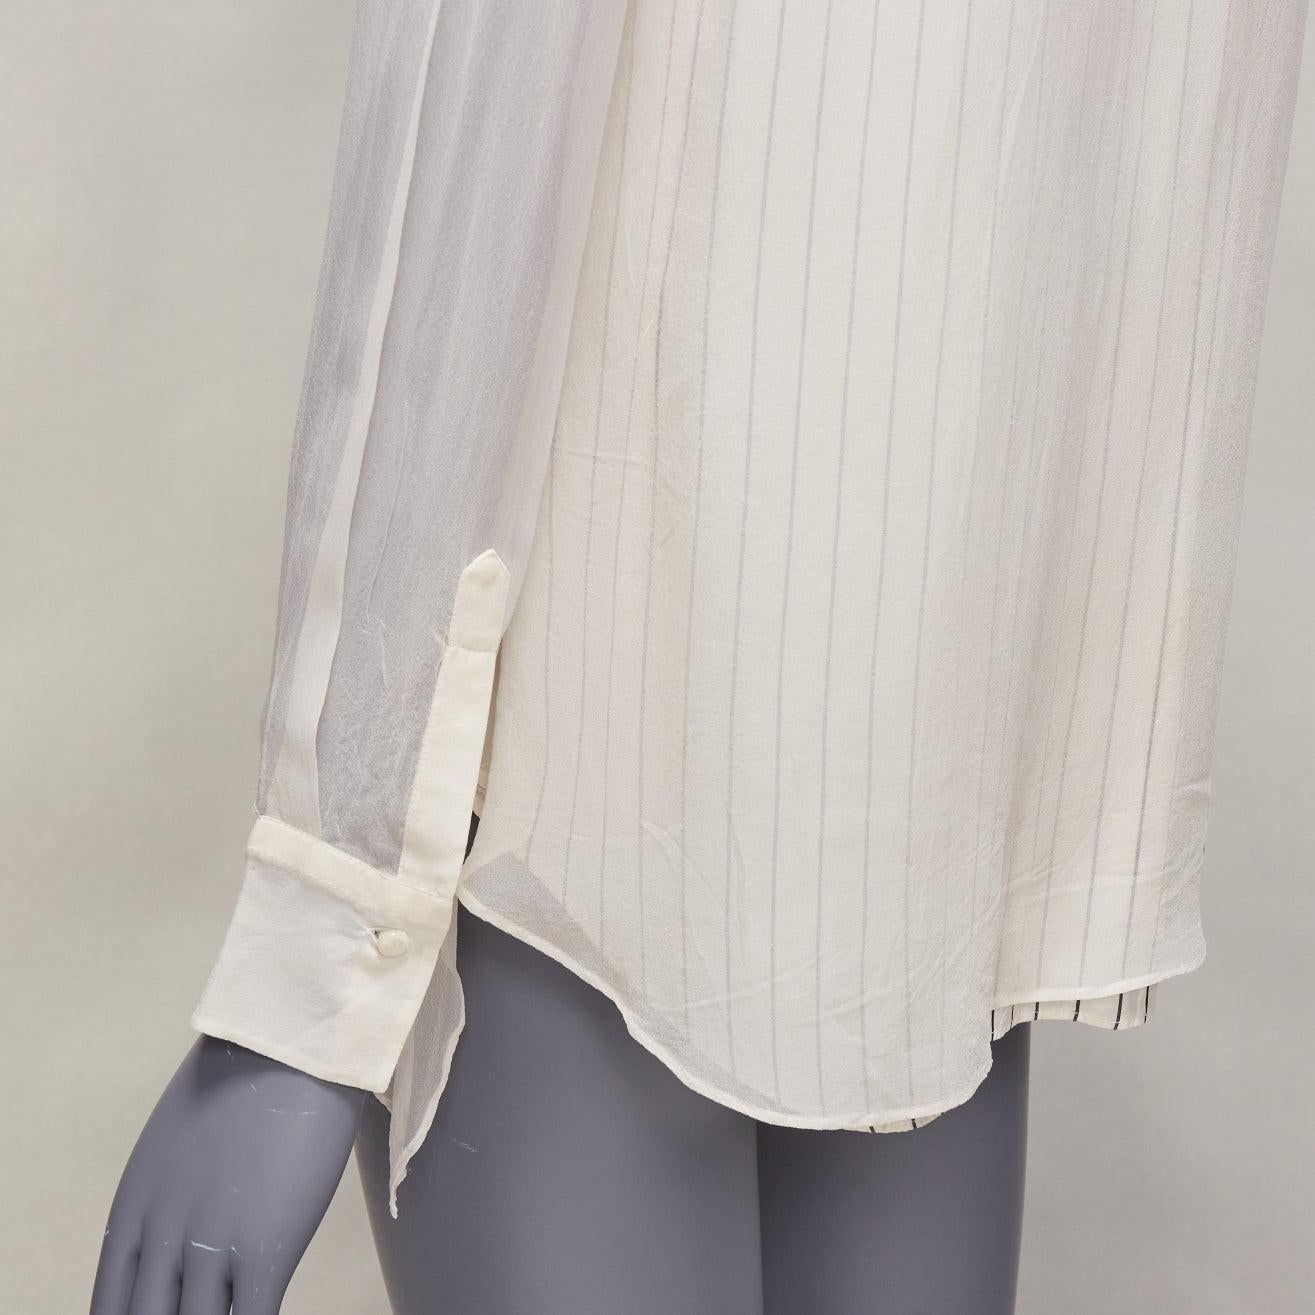 BRUNELLO CUCINELLI 100% silk cream grey layered panels sheer shirt XS
Reference: EALU/A00005
Brand: Brunello Cucinelli
Material: Silk
Color: Cream
Pattern: Pinstriped
Closure: Button
Lining: Cream Silk
Extra Details: Layered shirt effect and sheer